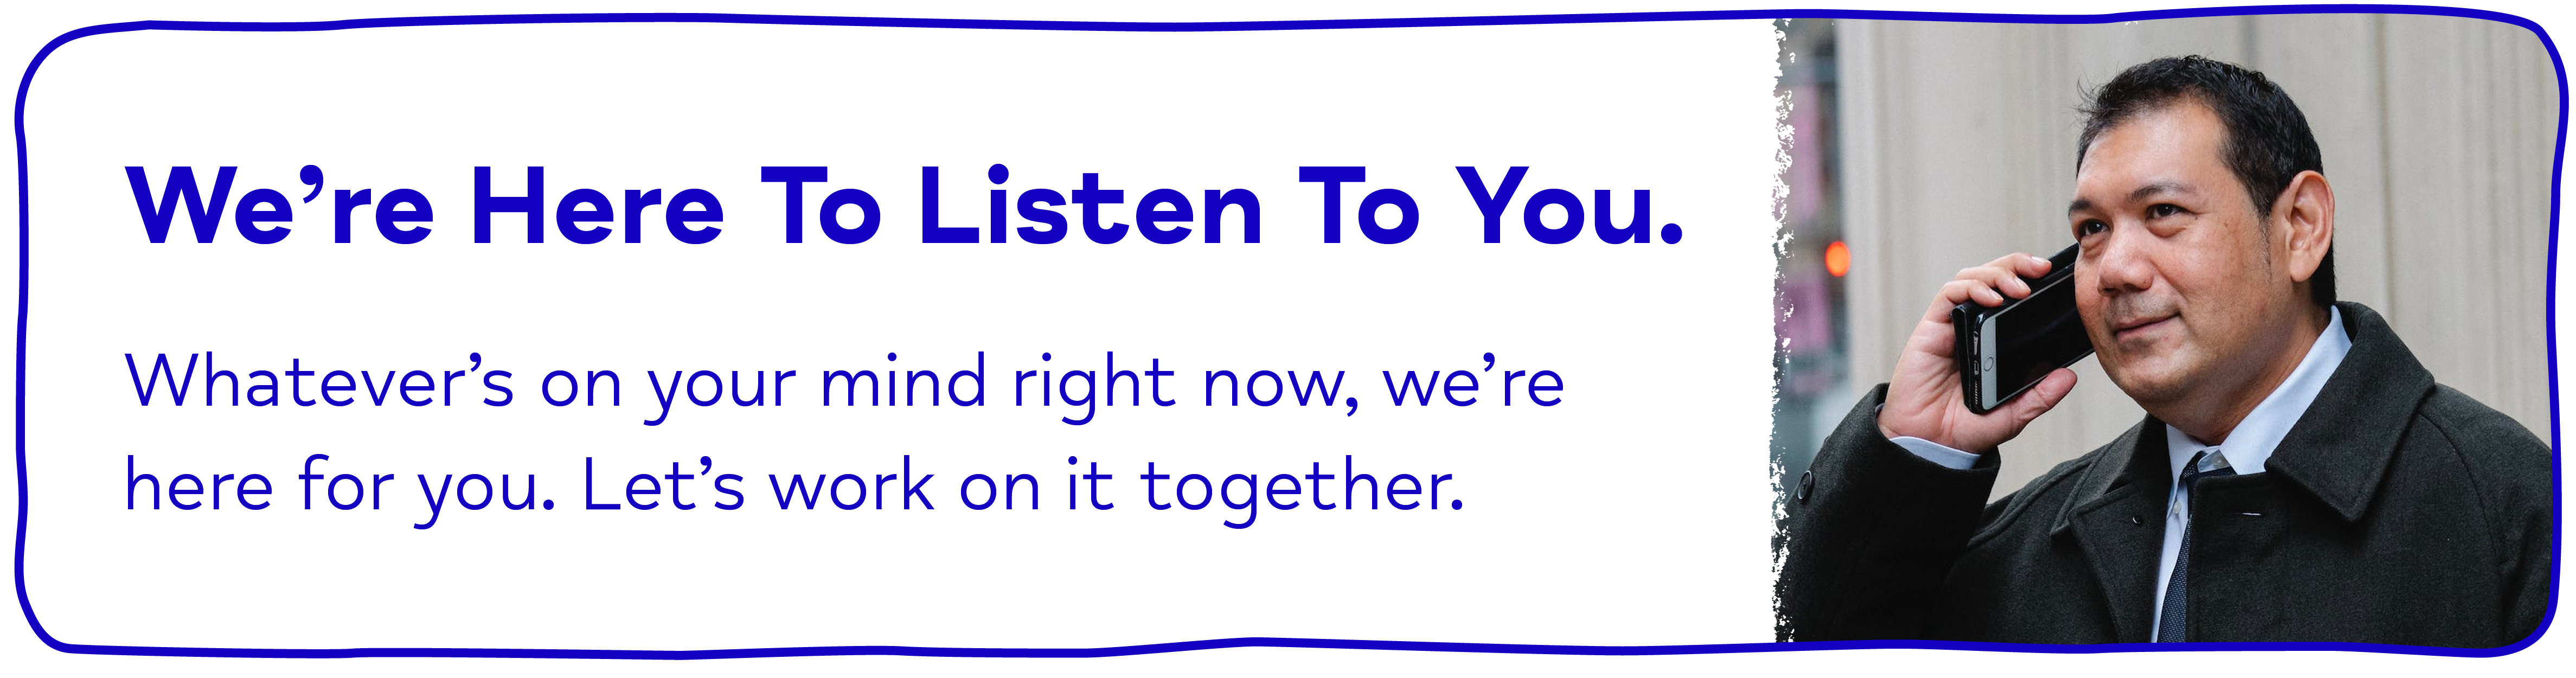 We’re Here To Listen To You. Whatever’s on your mind right now, we’re here for you. Let’s work on it together.